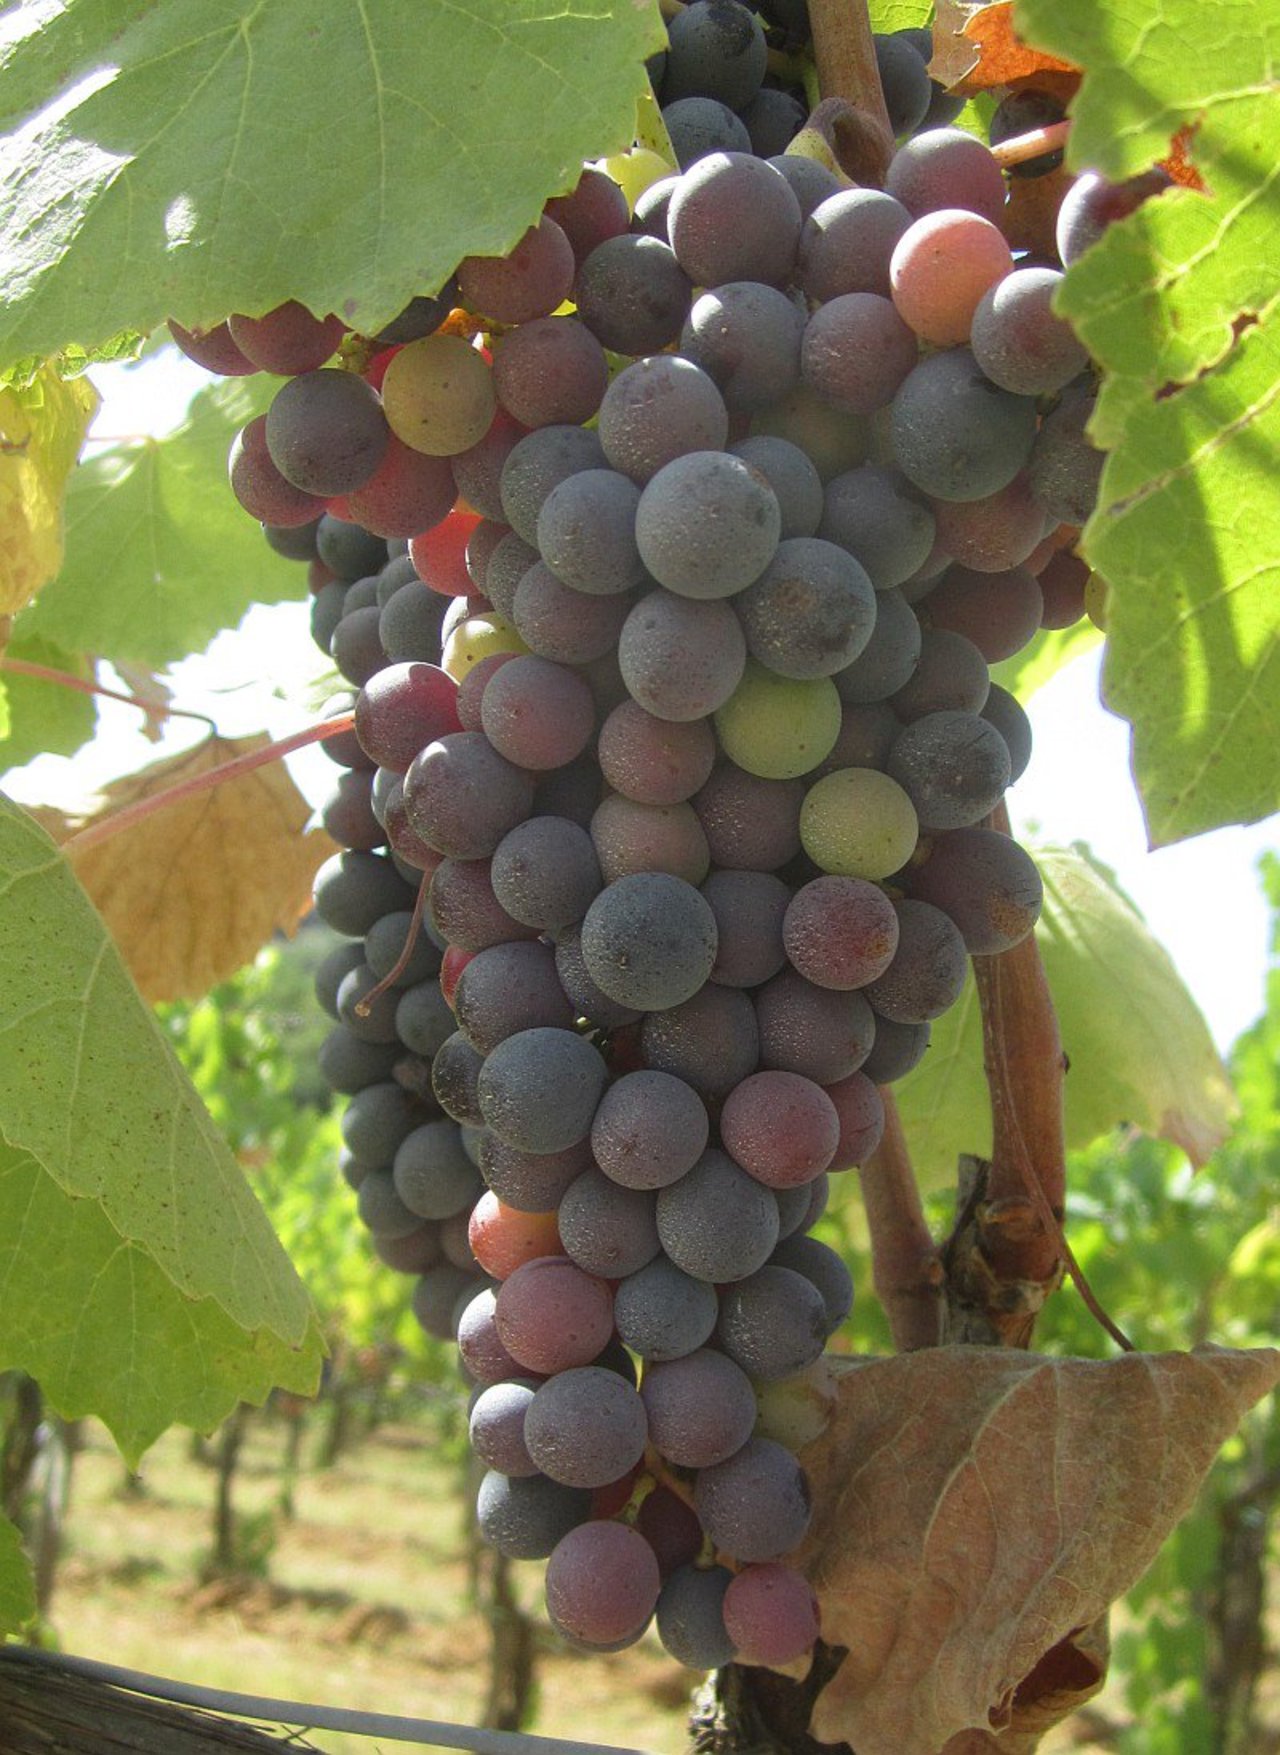 2016 veraison of autochthonous variety: Mammolo, mid August #Tuscany #Chianti #wine https://t.co/envW2dLieH